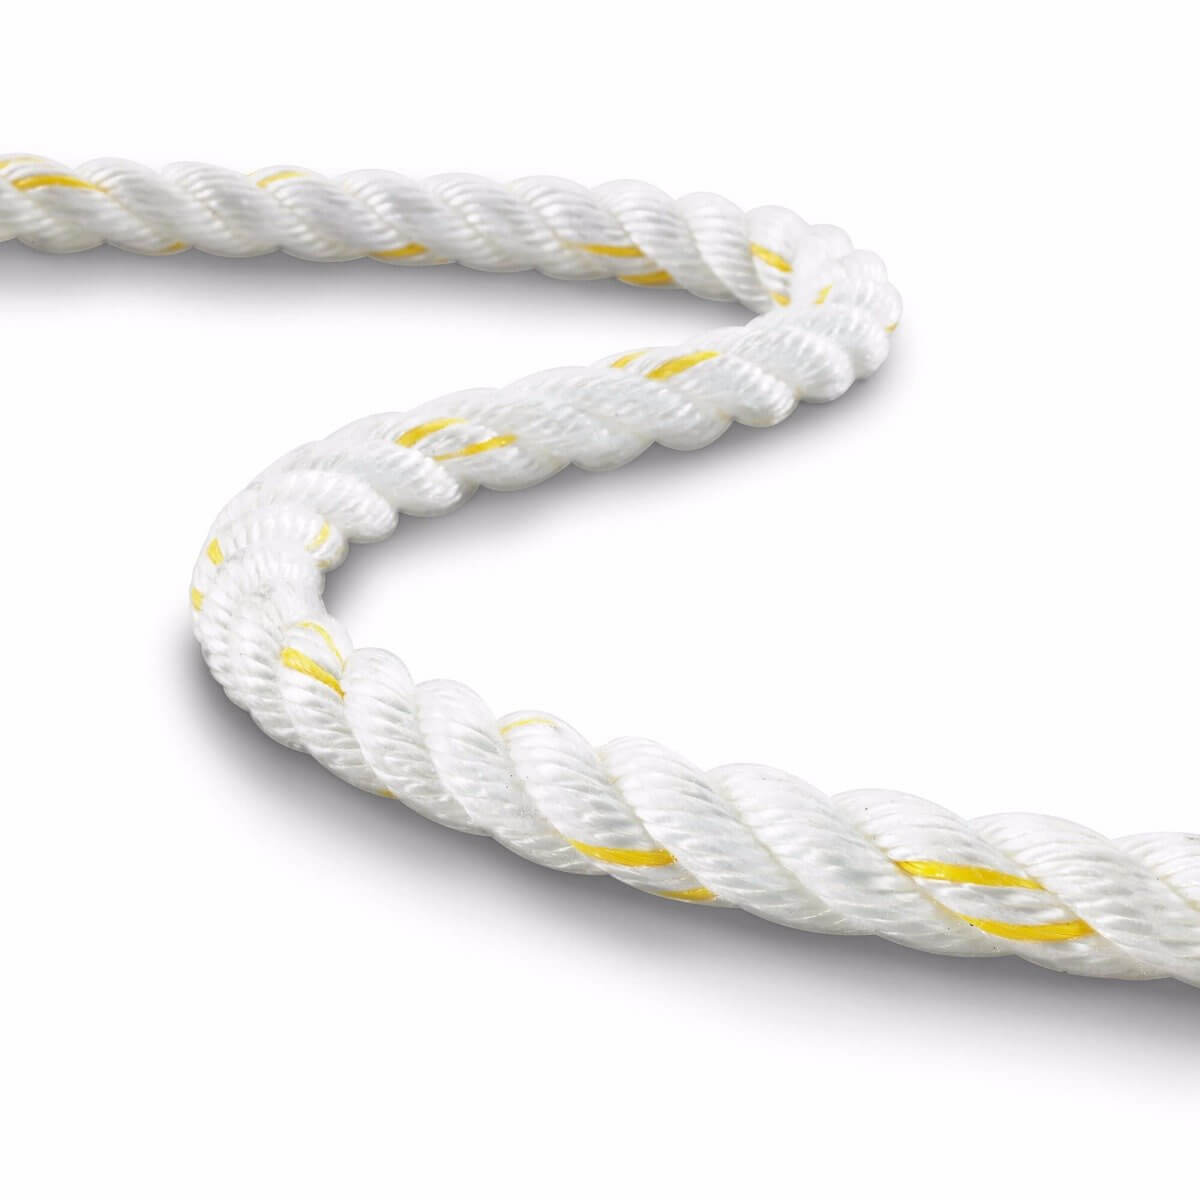 new england rigging rope